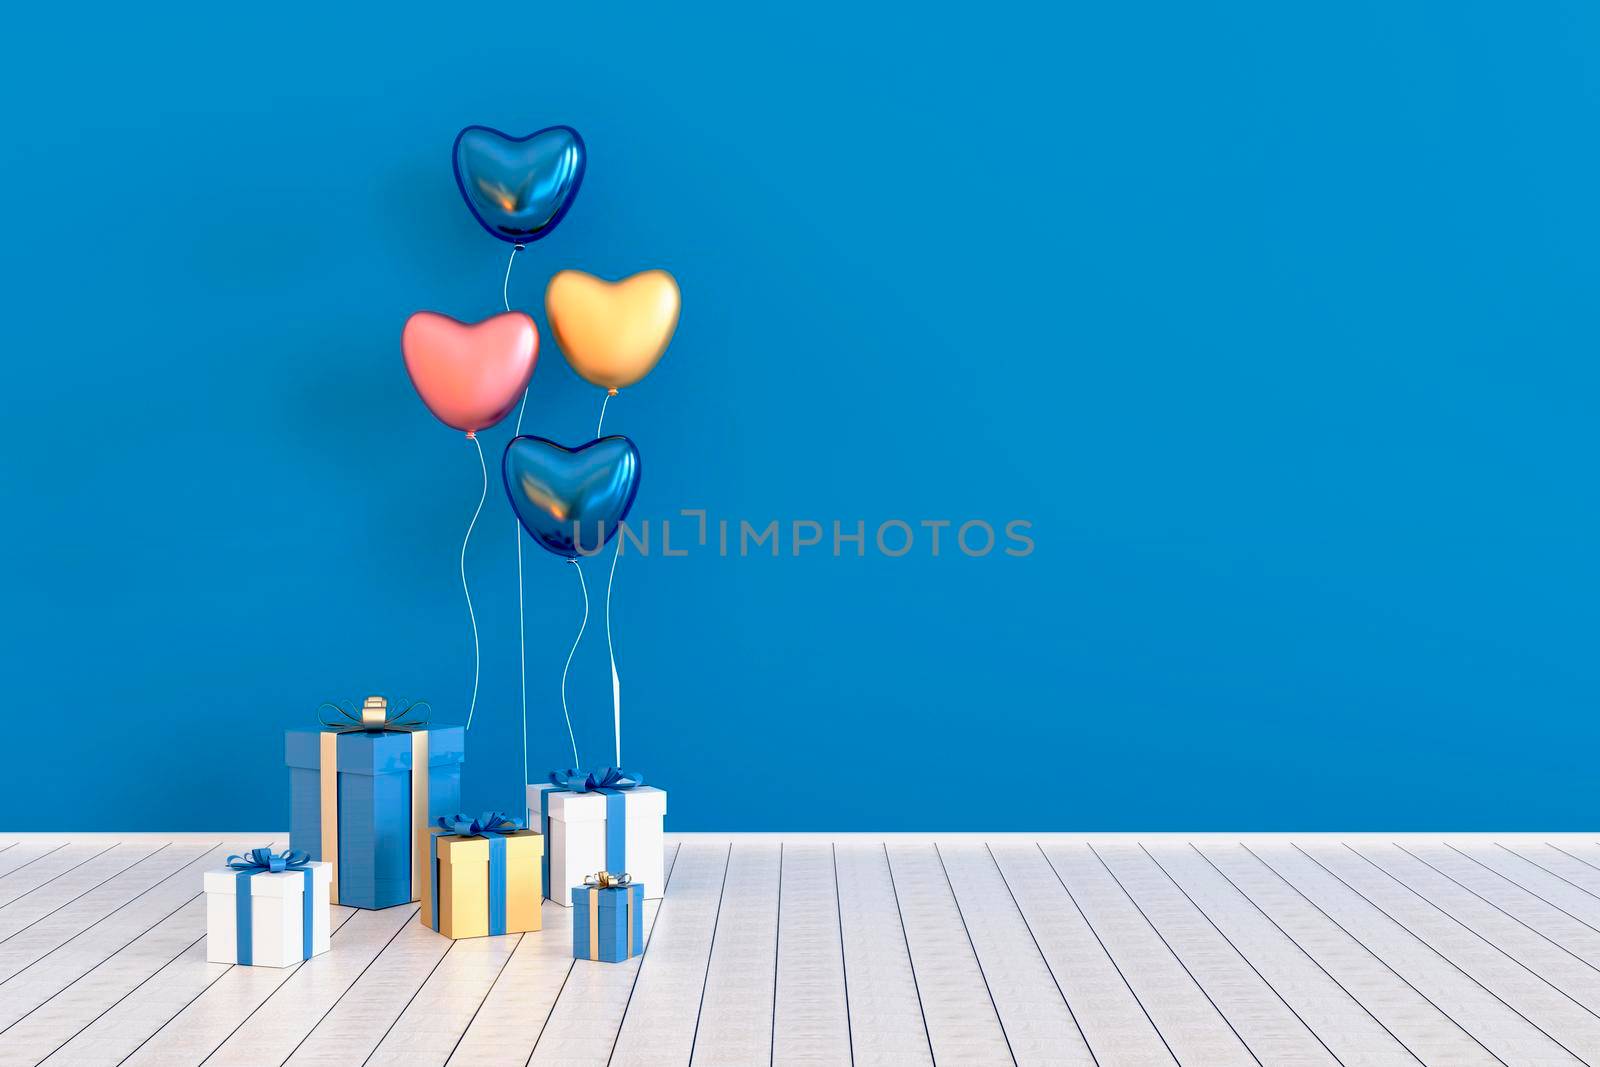 Set of glossy 3d realistic balloons and gift boxes. Valentine's Day or wedding day romantic background for party, events, presentation or promotion banner, posters. 3d render